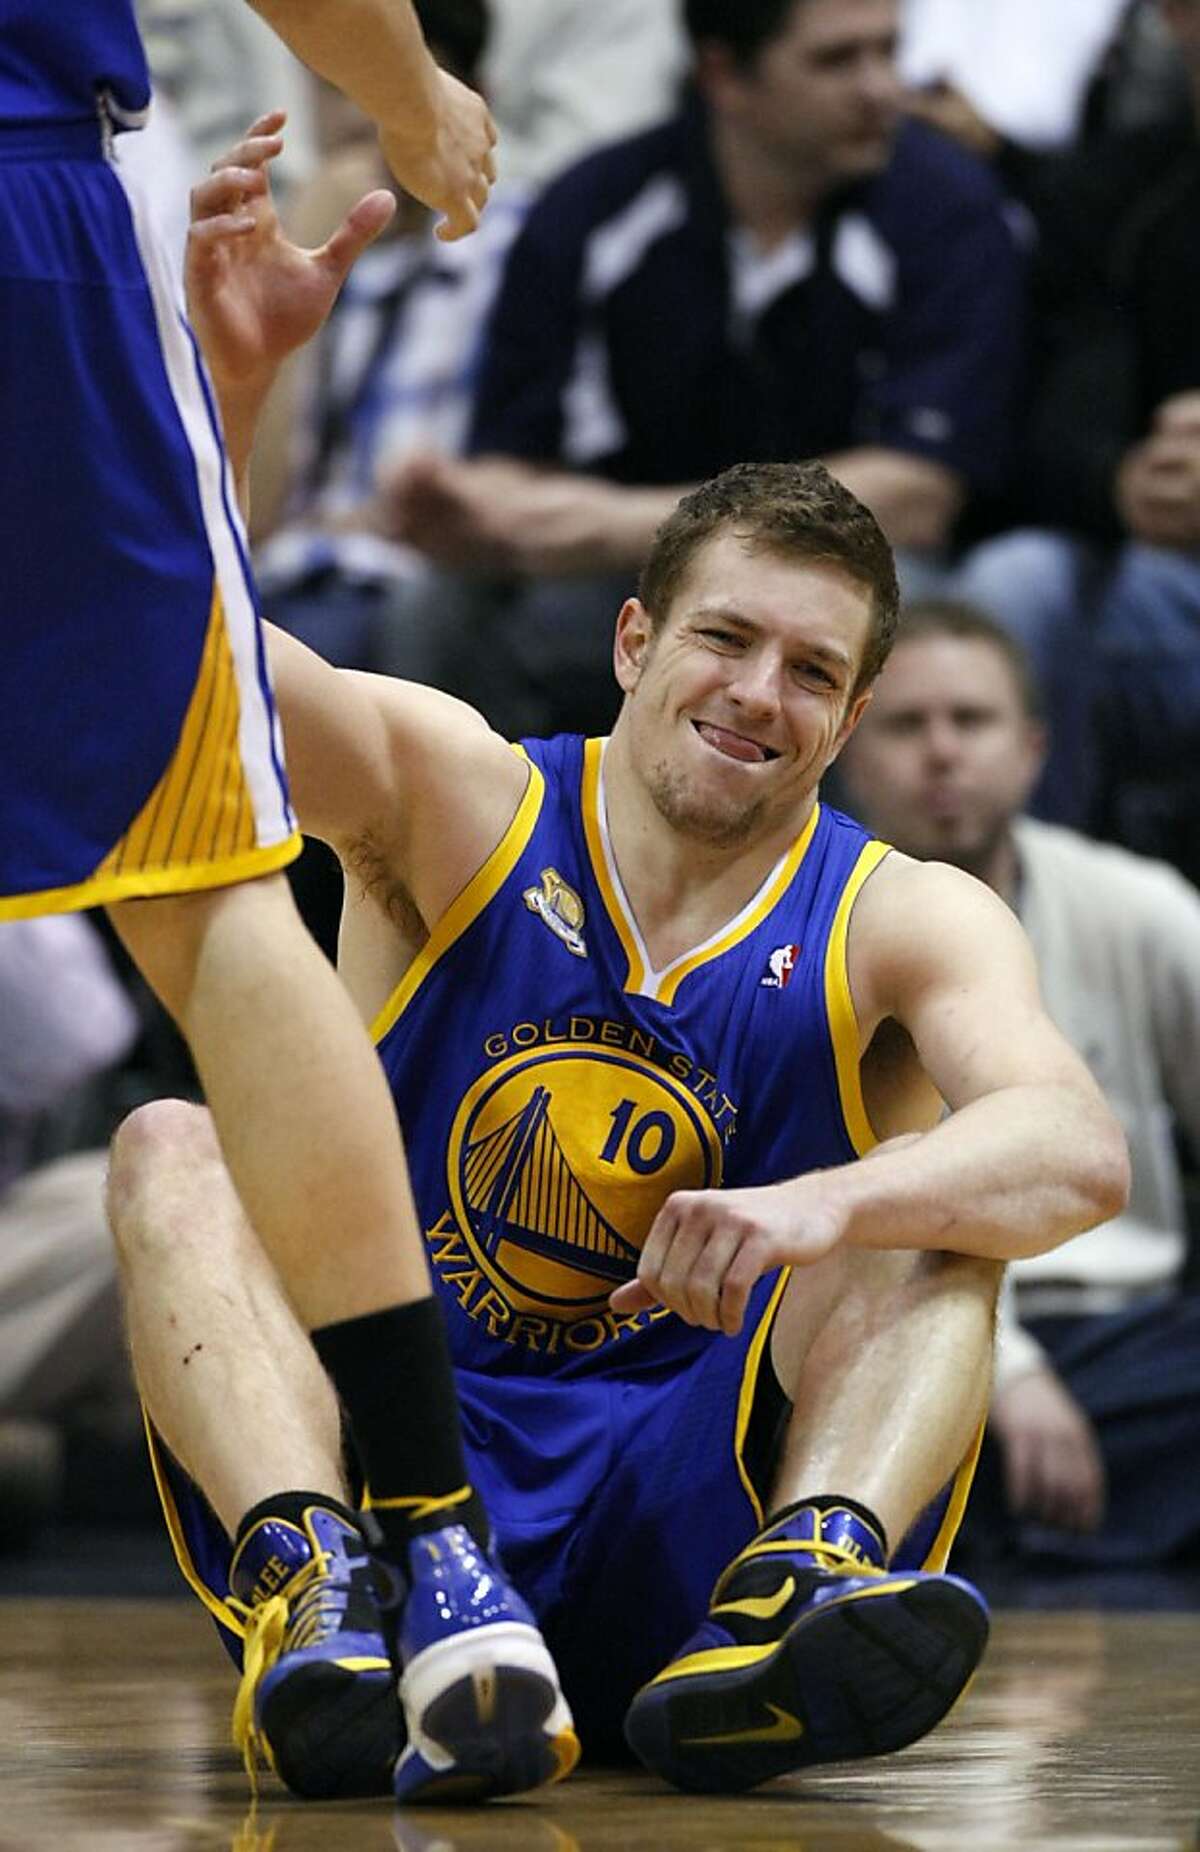 Golden State Warriors power forward David Lee (10) reaches for help up off the court floor after falling during the second half of an NBA basketball game against the Utah Jazz, Friday, April 6, 2012, in Salt Lake City.